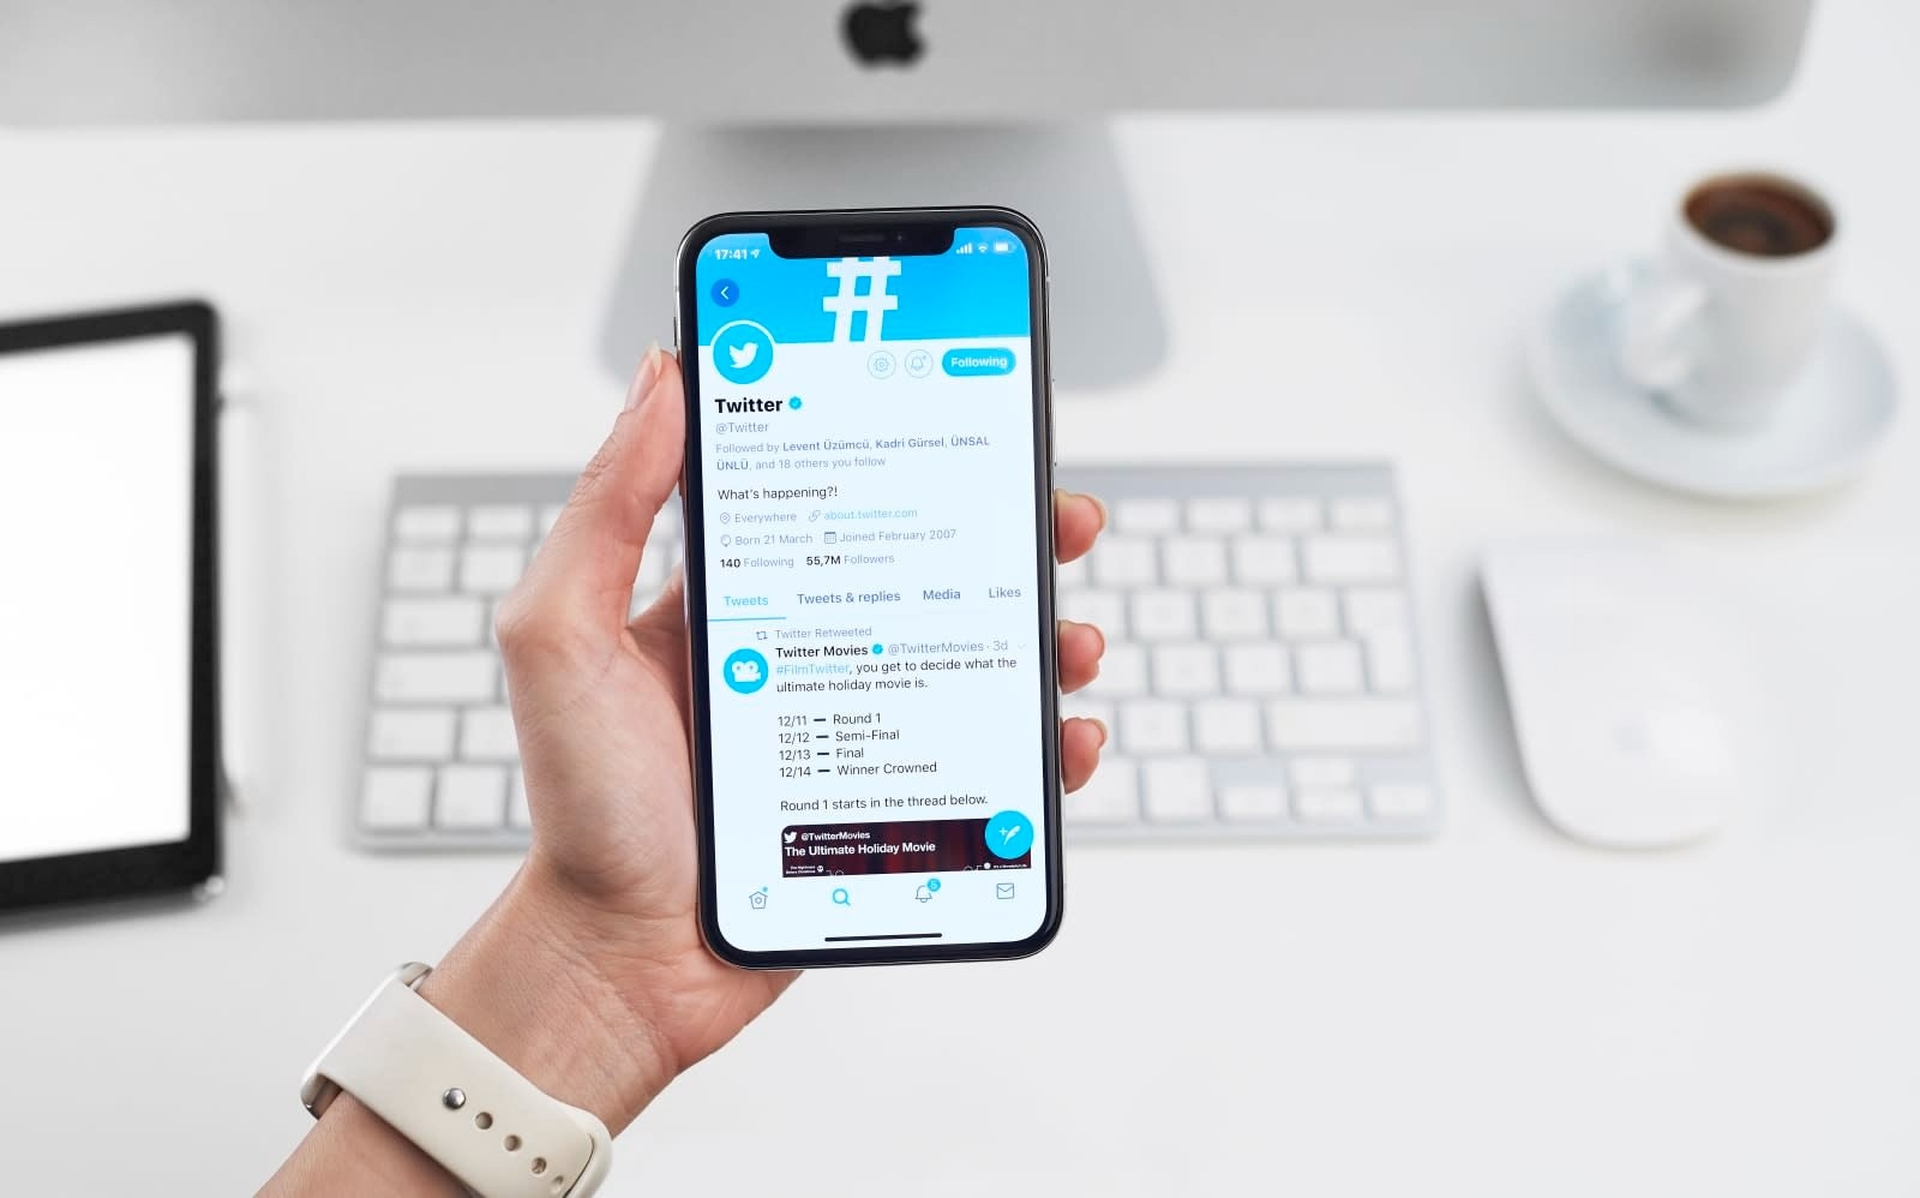 Today, we are going to tell you how to embed video in Twitter on your PC, iPhone or Android, as well as showing you embedding Youtube videos in your tweets.